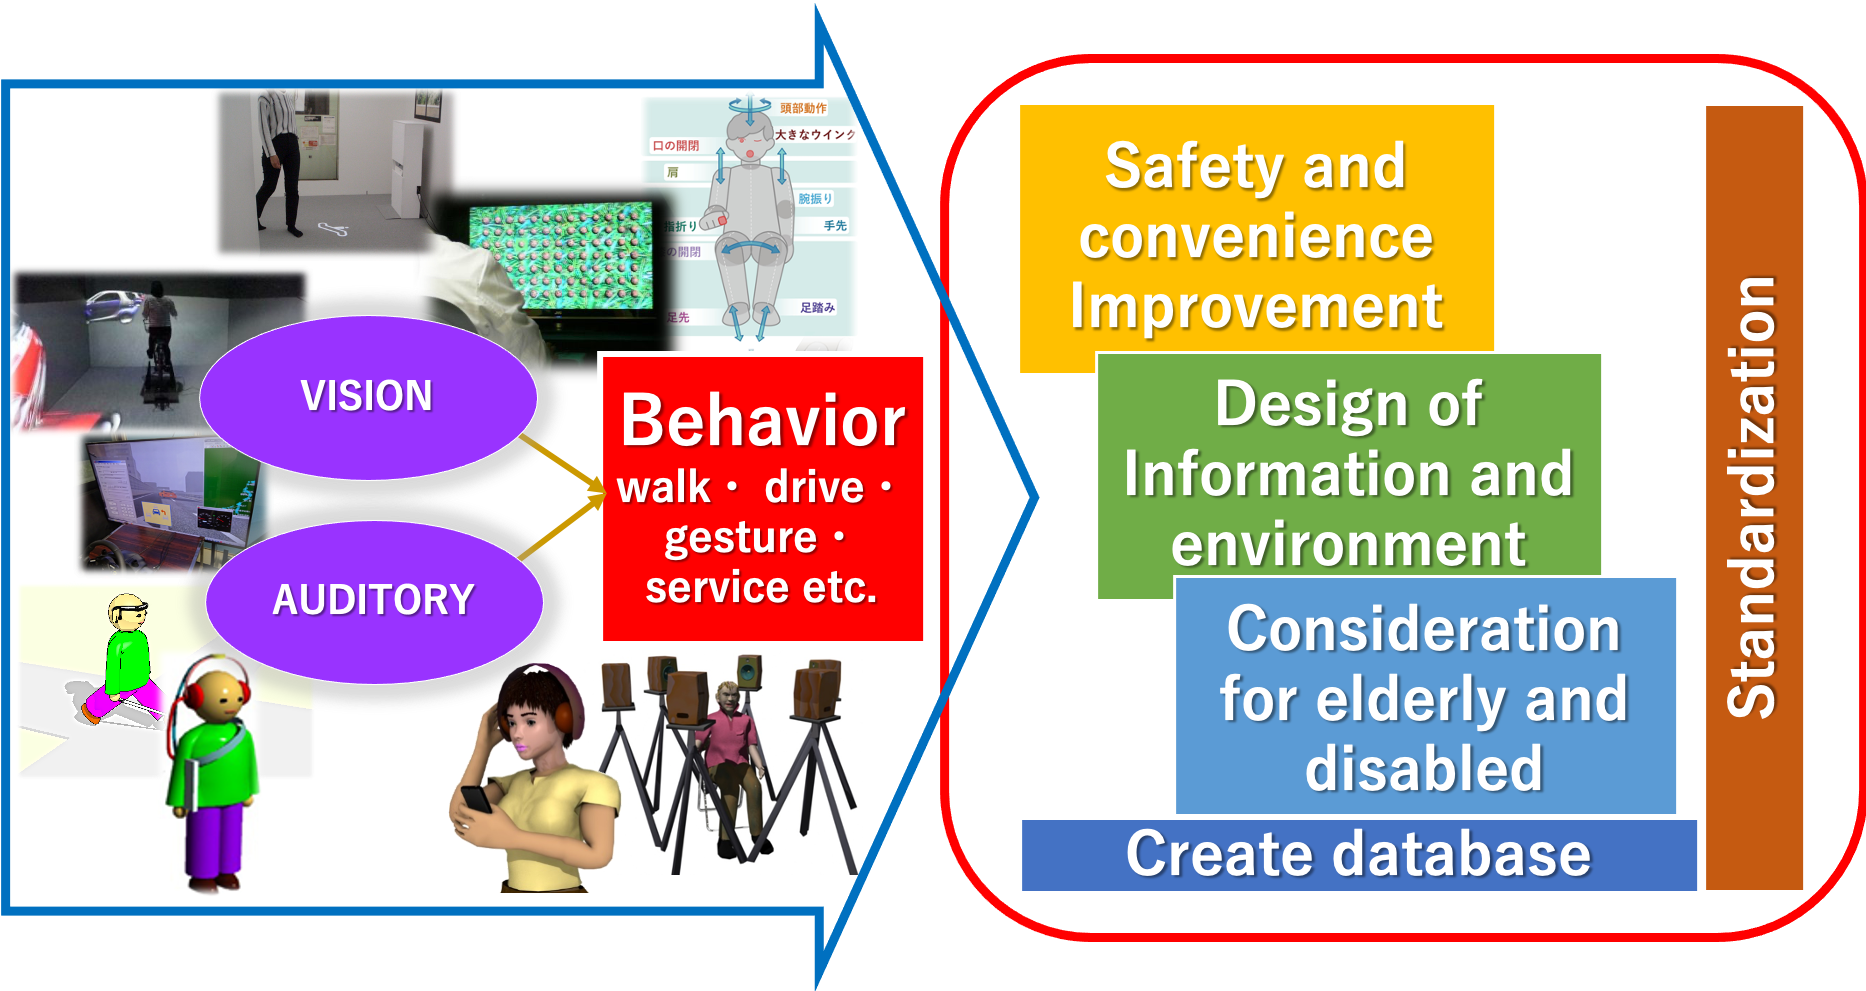 This figure shows that safety and convenience improvement, design of information and environment, consideration for elderly and disabled, create database and standardization are conducted by the human property where visual and auditory information reflect walk, drive, gesture, service etc.